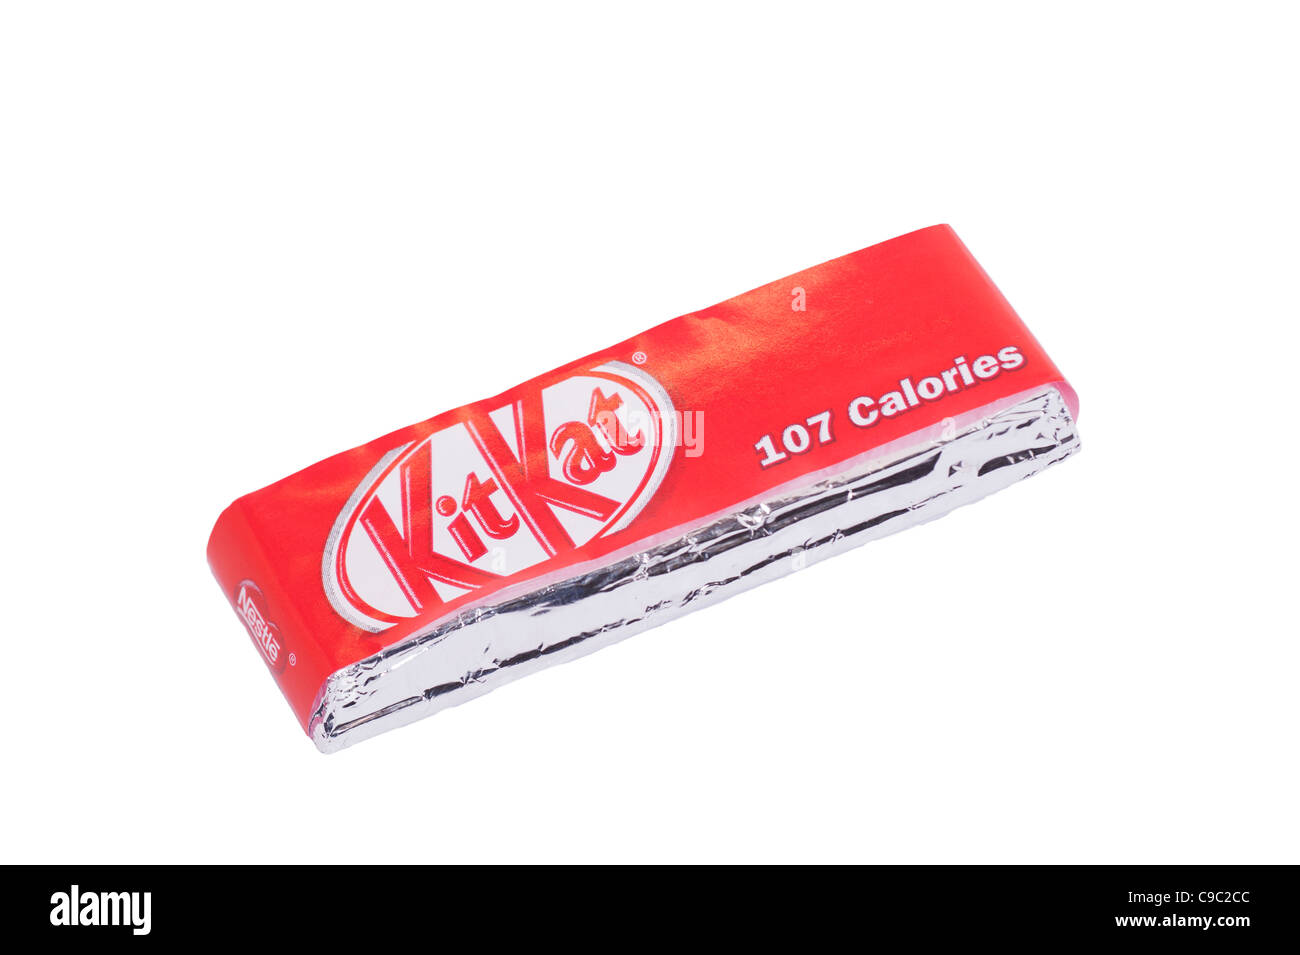 A Nestle KitKat two finger chocolate bar on a white background Stock Photo